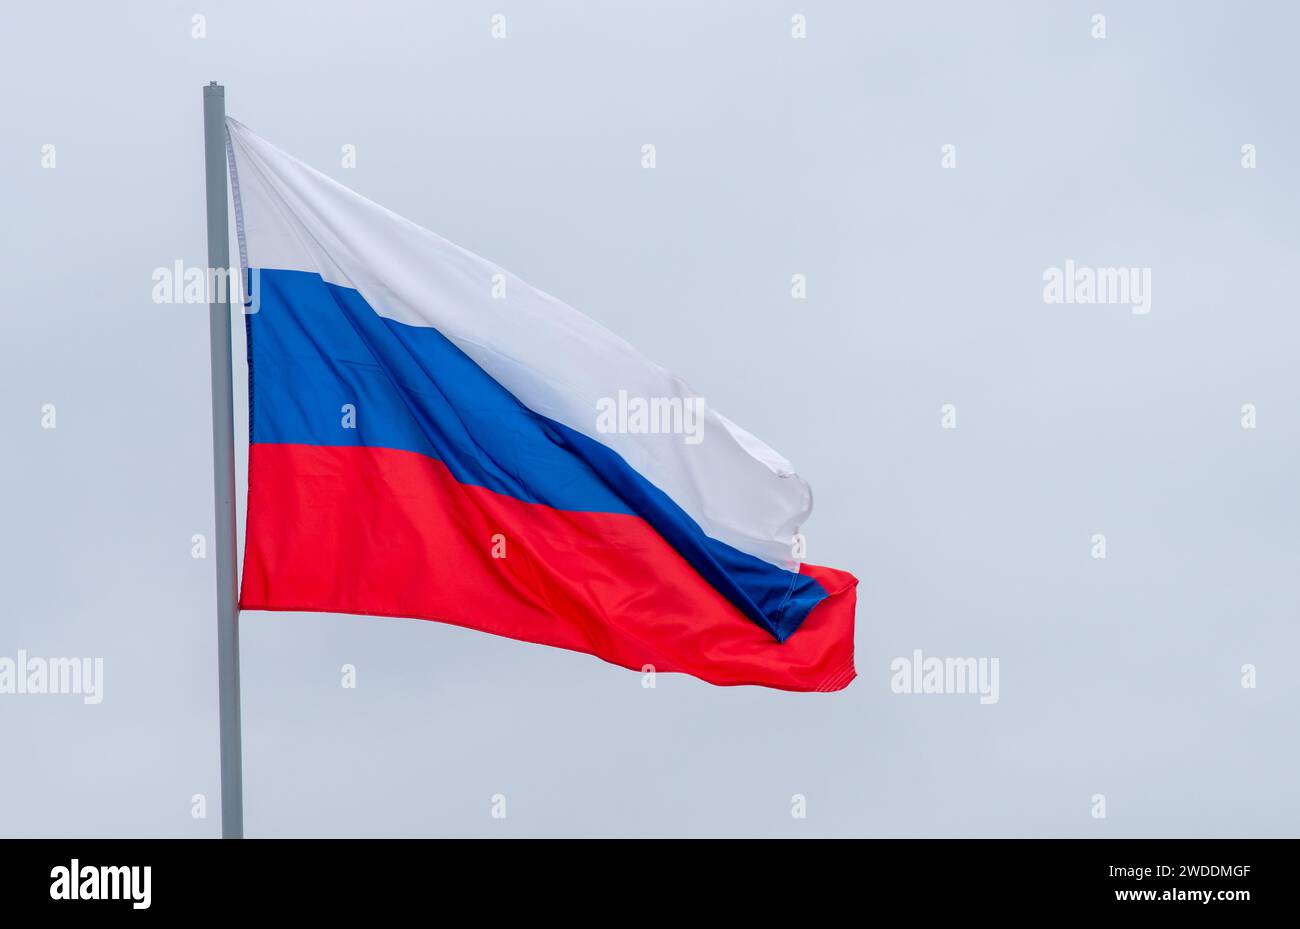 The white-blue-red flag of the Russian Federation is flying in the wind against a cloudy sky. Stock Photo